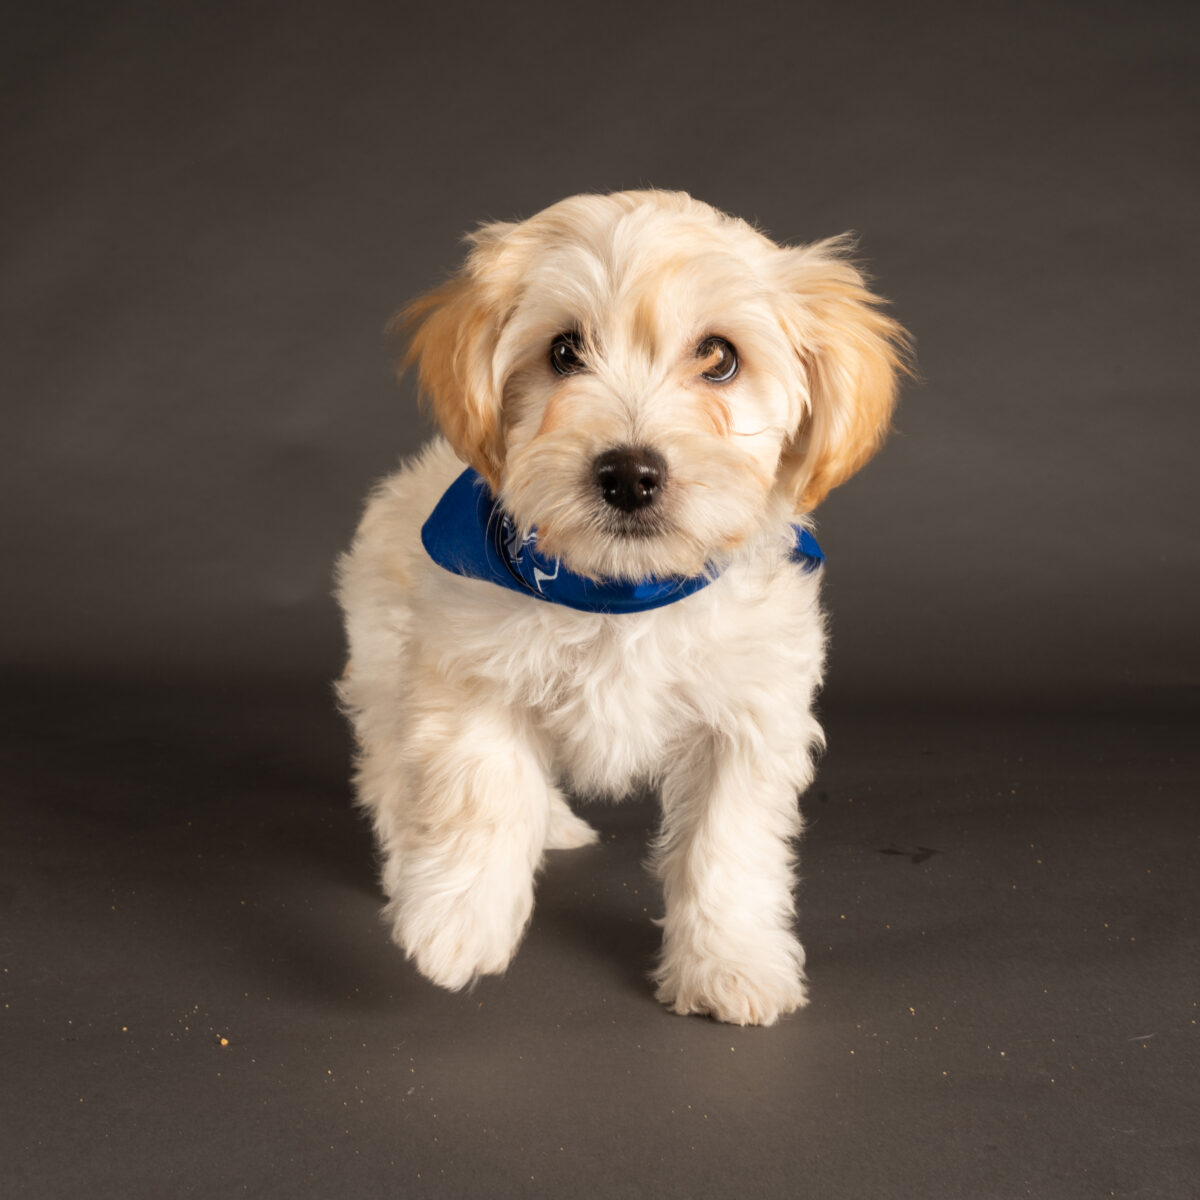 Meet the adorable puppies competing for Team Fluff in Puppy Bowl XVIII